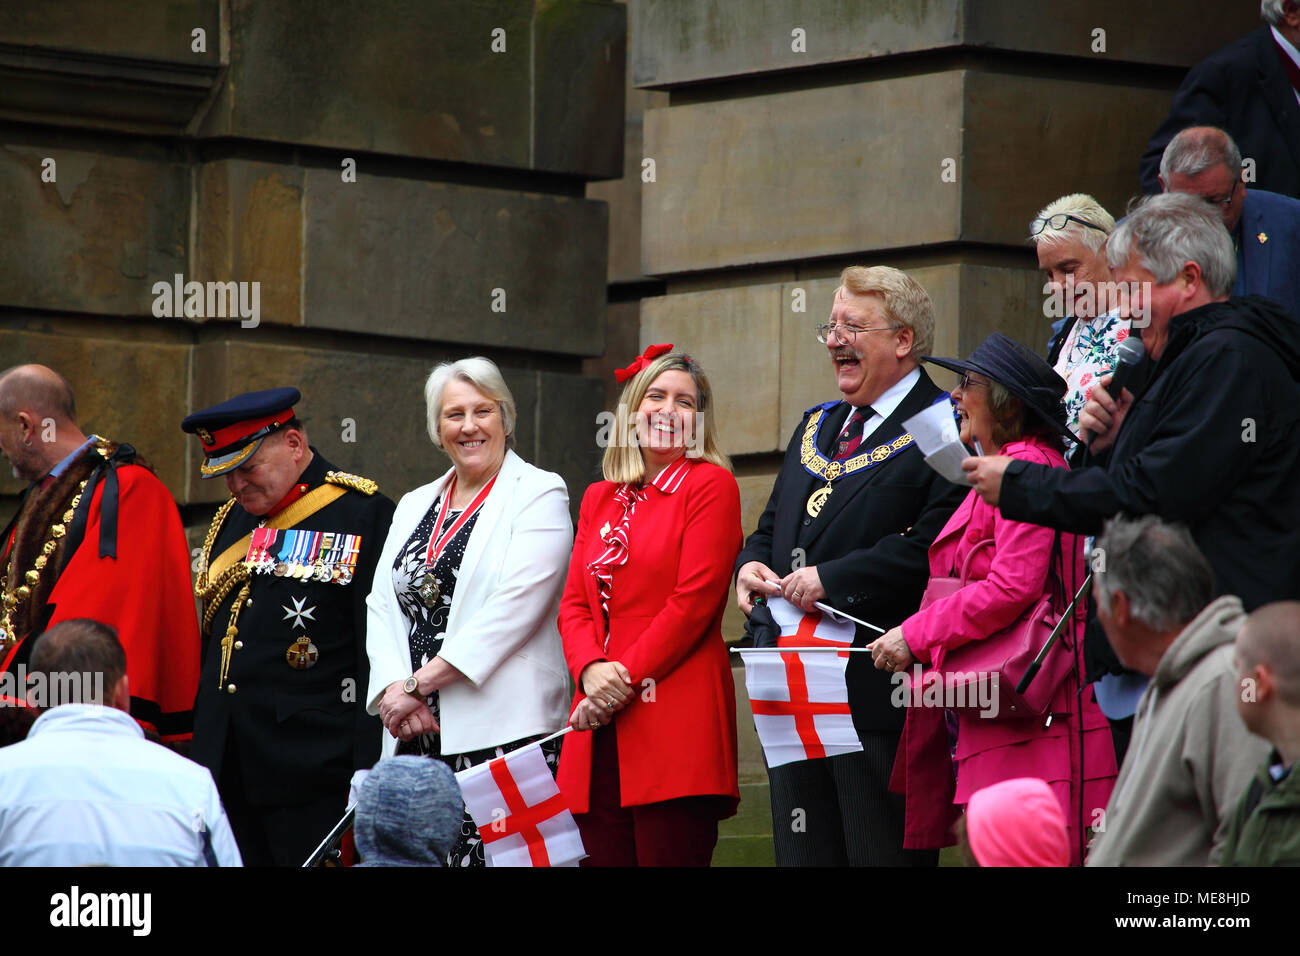 Morley, Leeds, UK - 22nd April 2018. The annual St George's day parade gets underway with Conservative member of parliament for the Morley and Outwood constituency Andrea Jenkyns standing on the steps of Morley town hall. Stock Photo